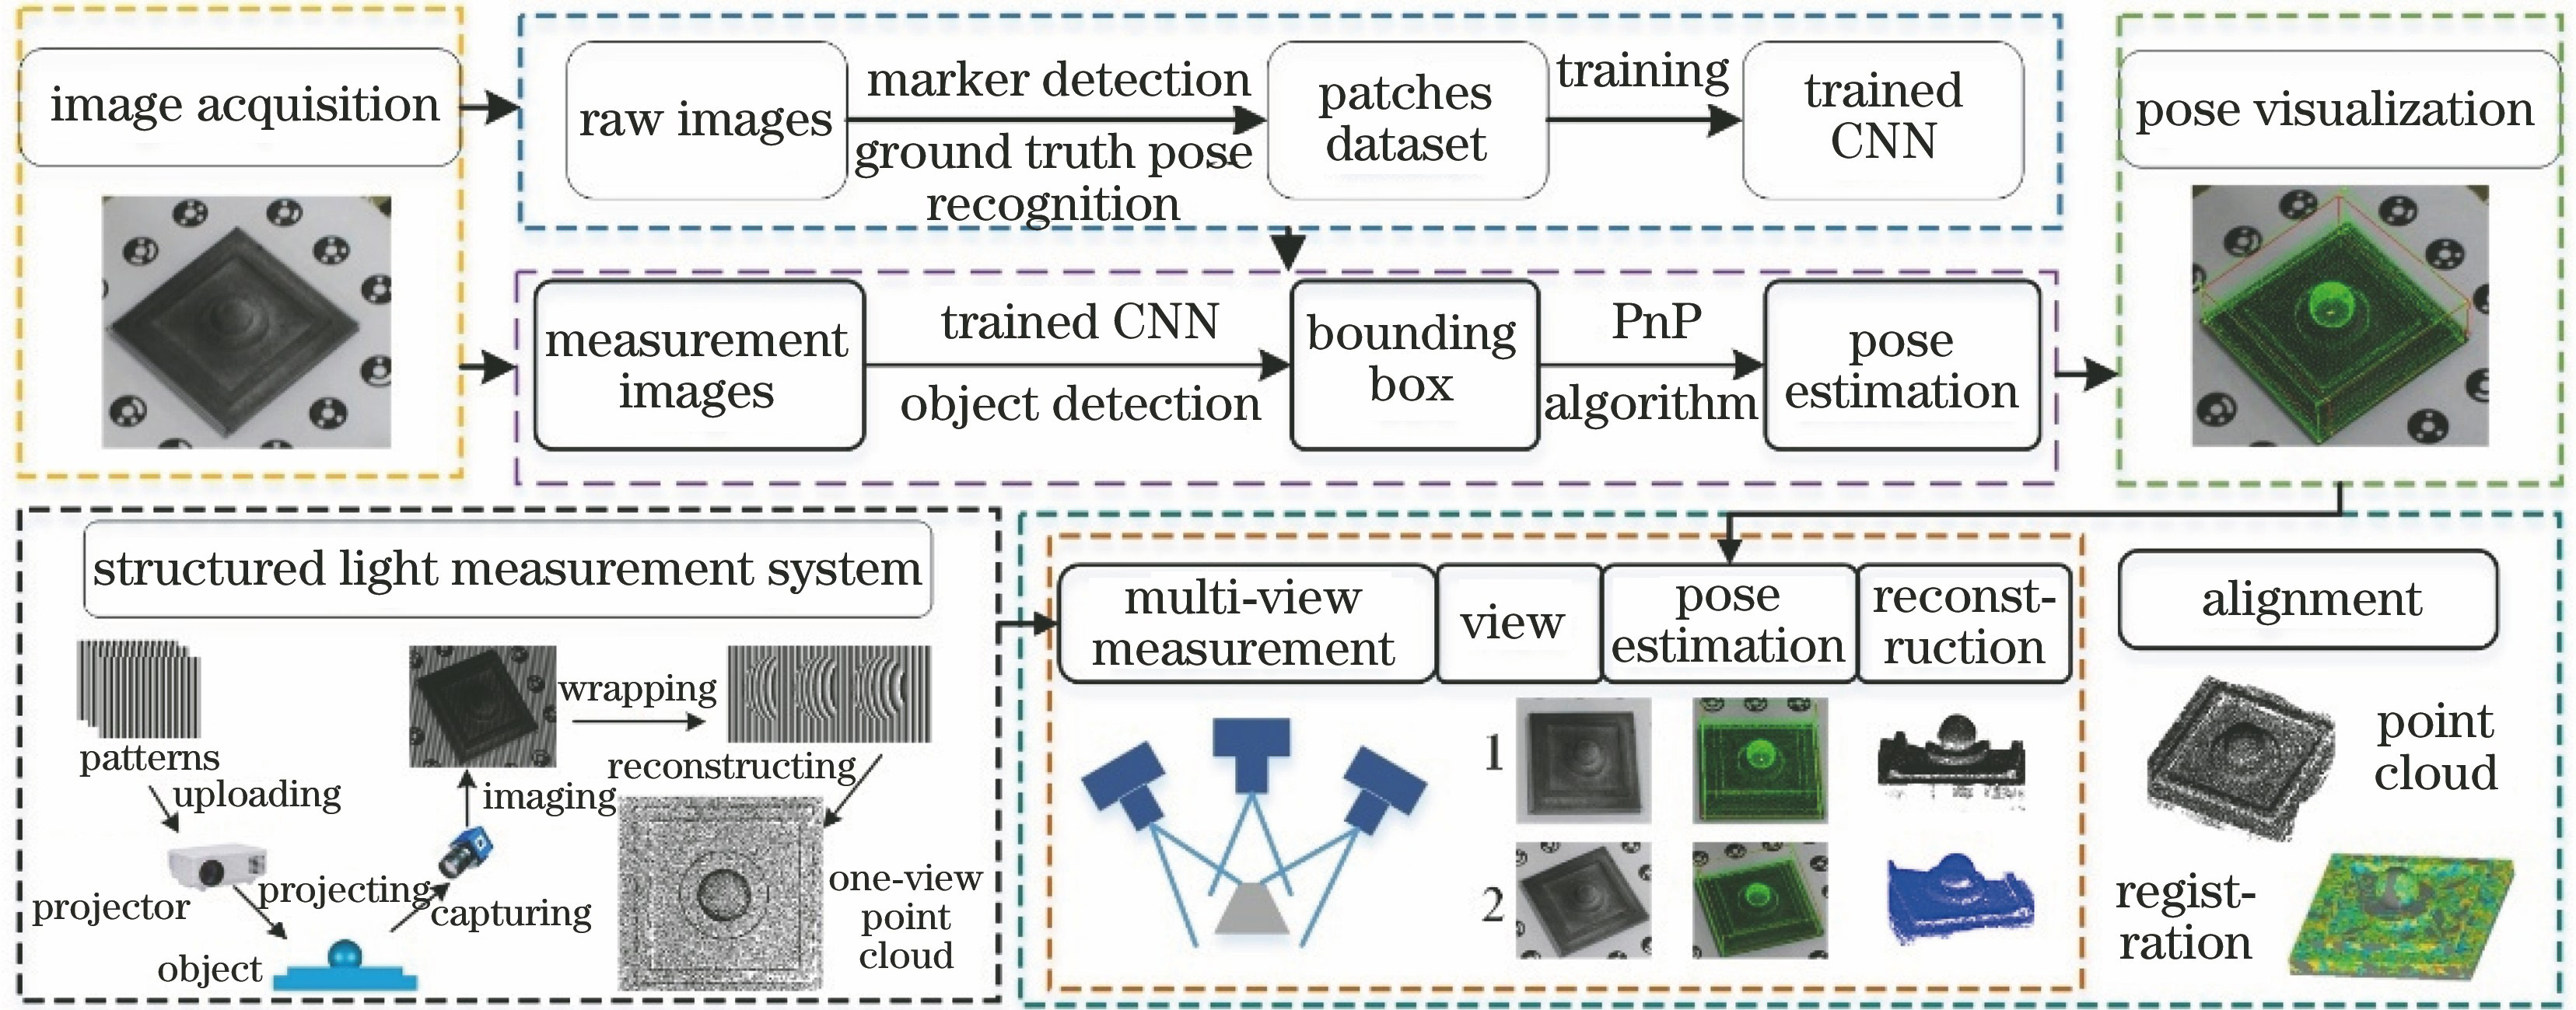 Proposed data alignment strategy for multi-view structured light measurement